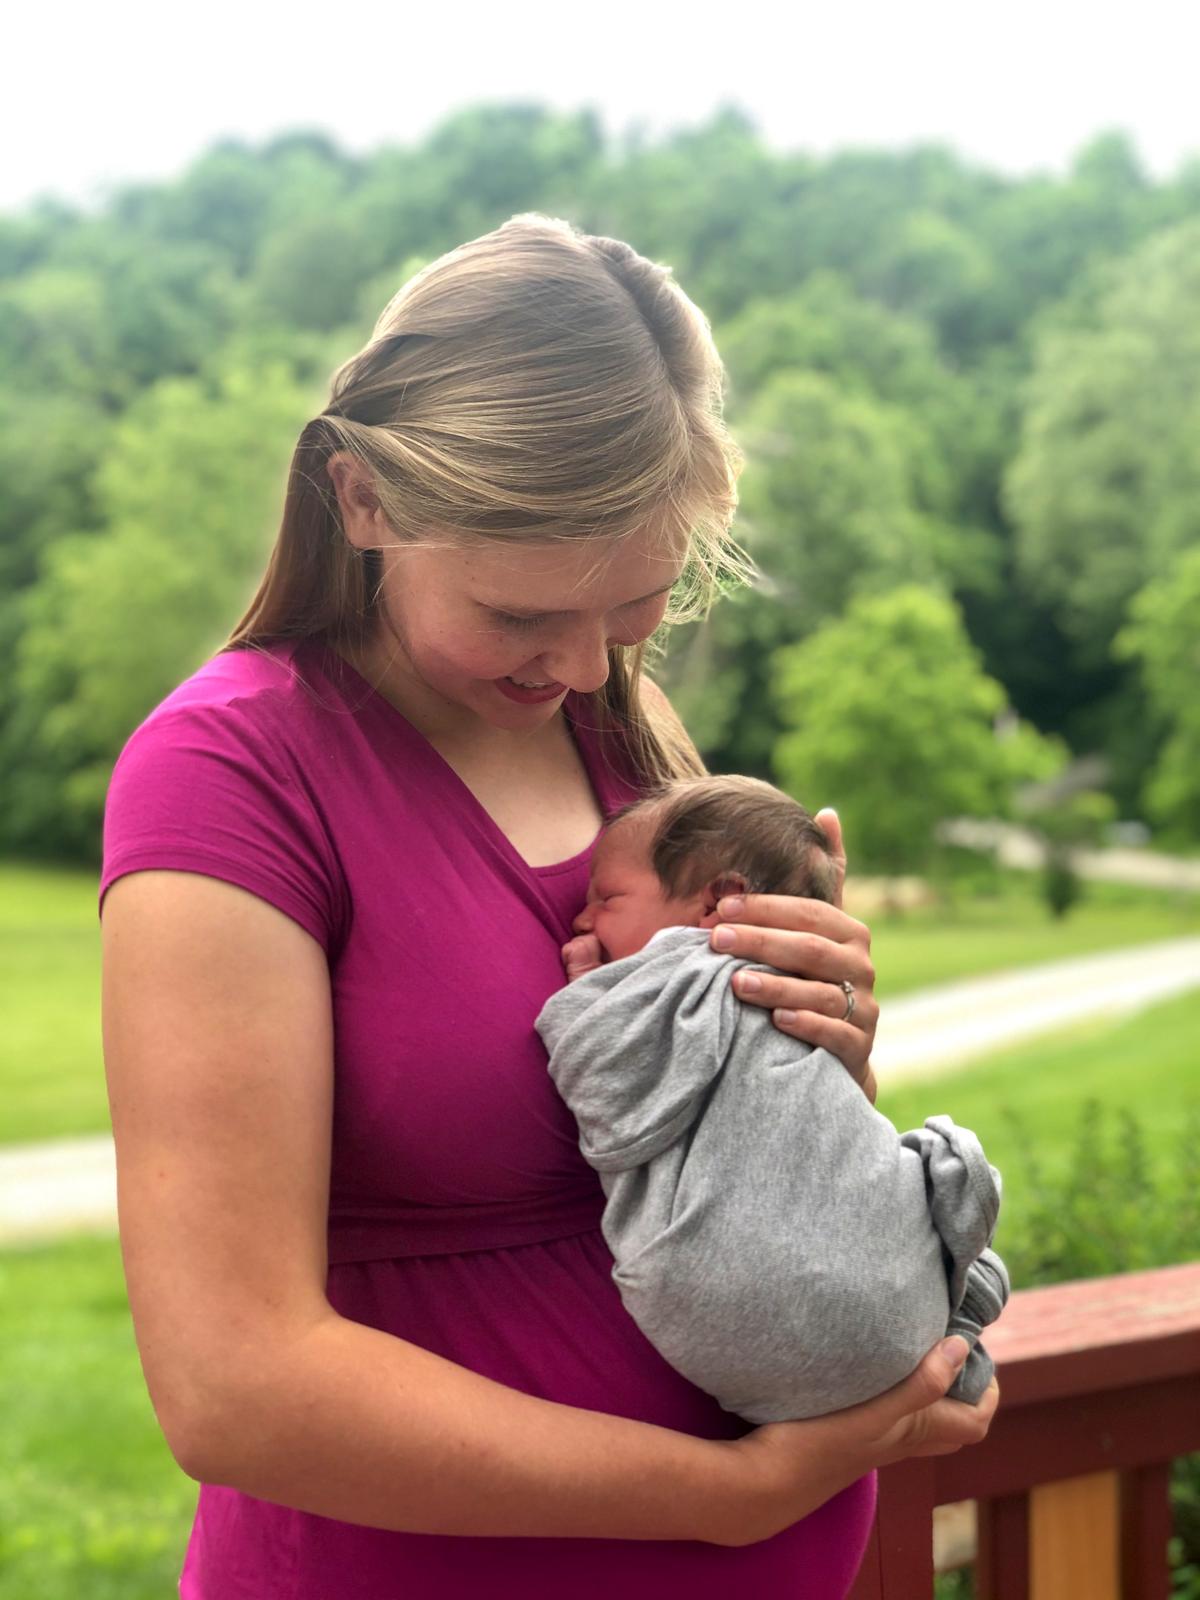 Mrs. Shrock with baby Charles about 36 hours after he was born, in June 2020. (Courtesy of Mariah Shrock)